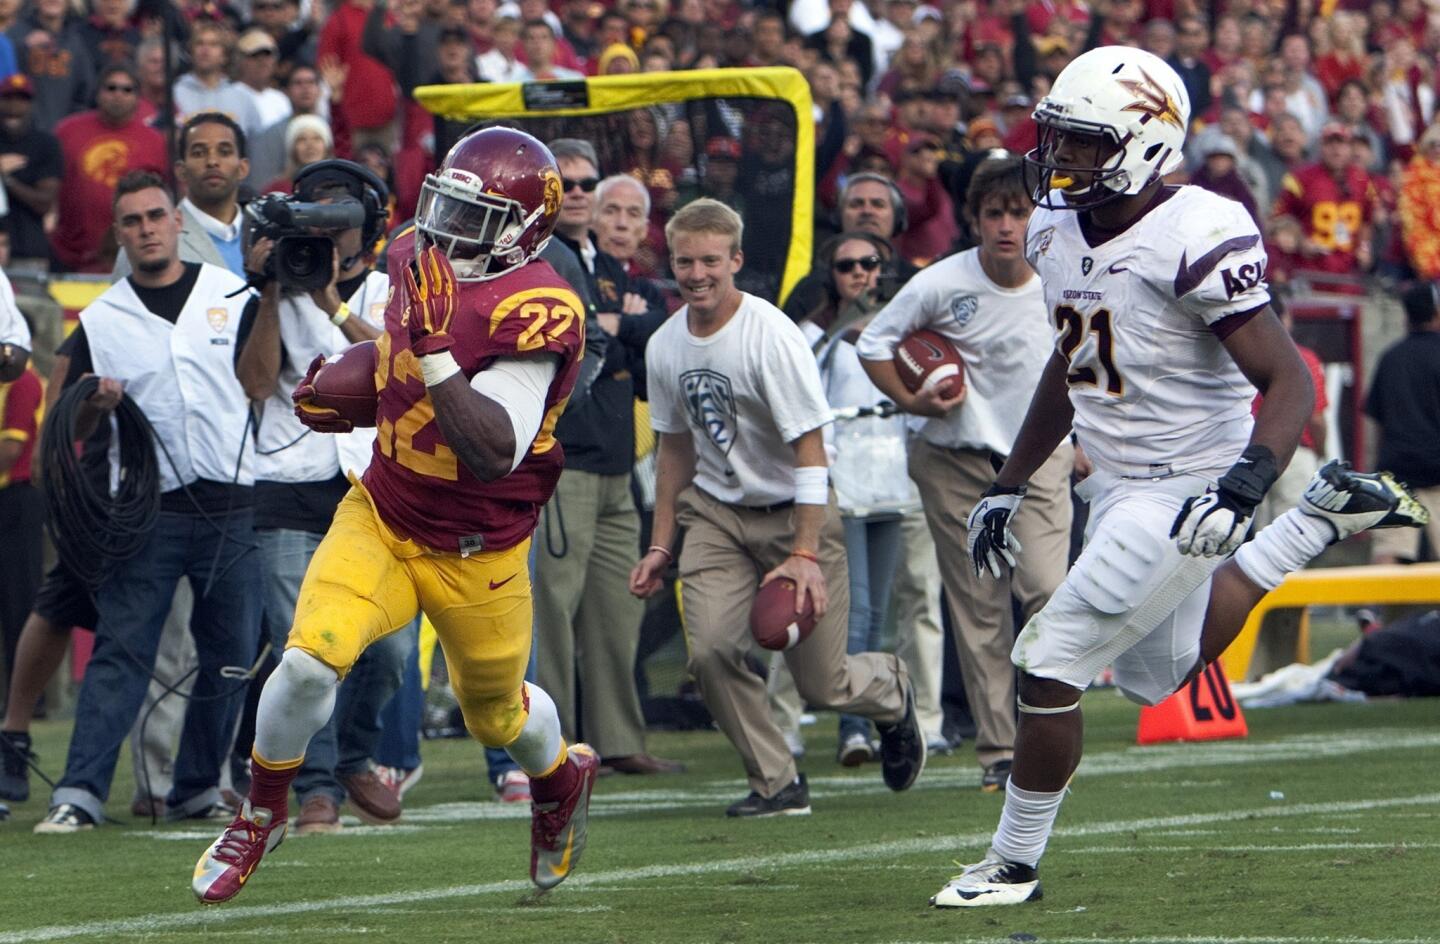 USC running back Curtis McNeal gets past Arizona State safety Chris Young to score the final touchdown of the game on Saturday.